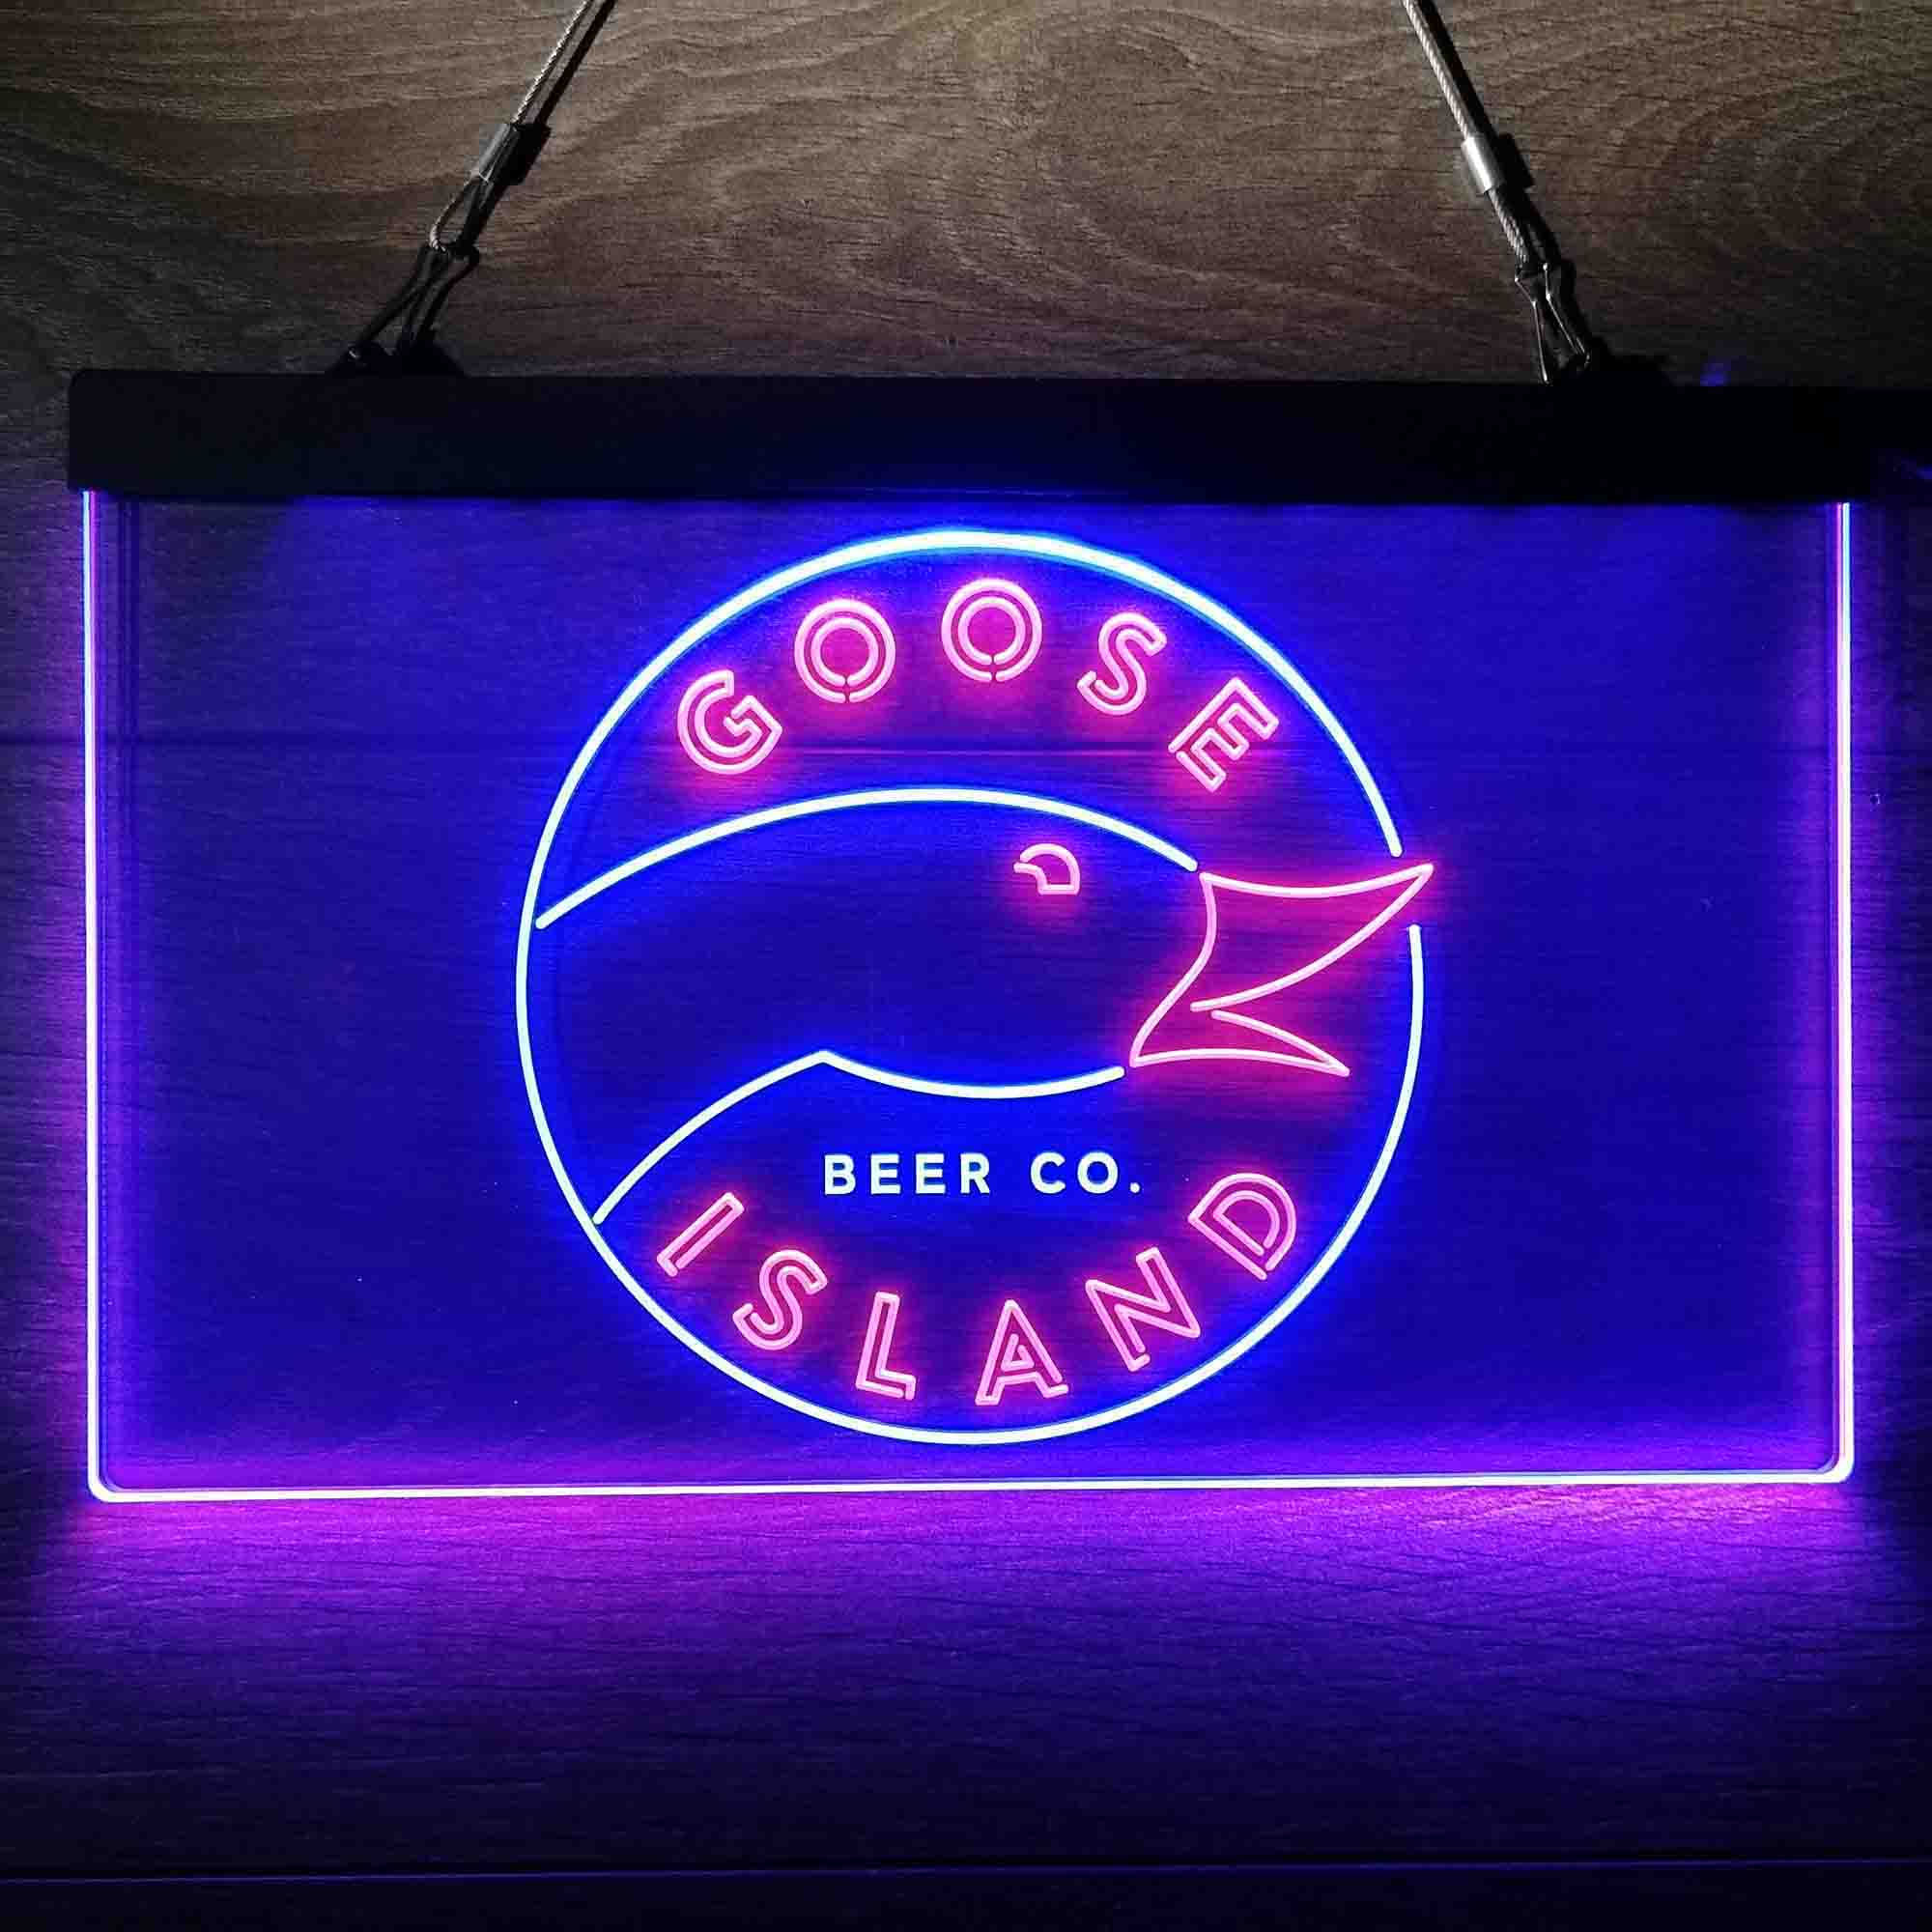 Goose Island Brewery LED Neon Sign